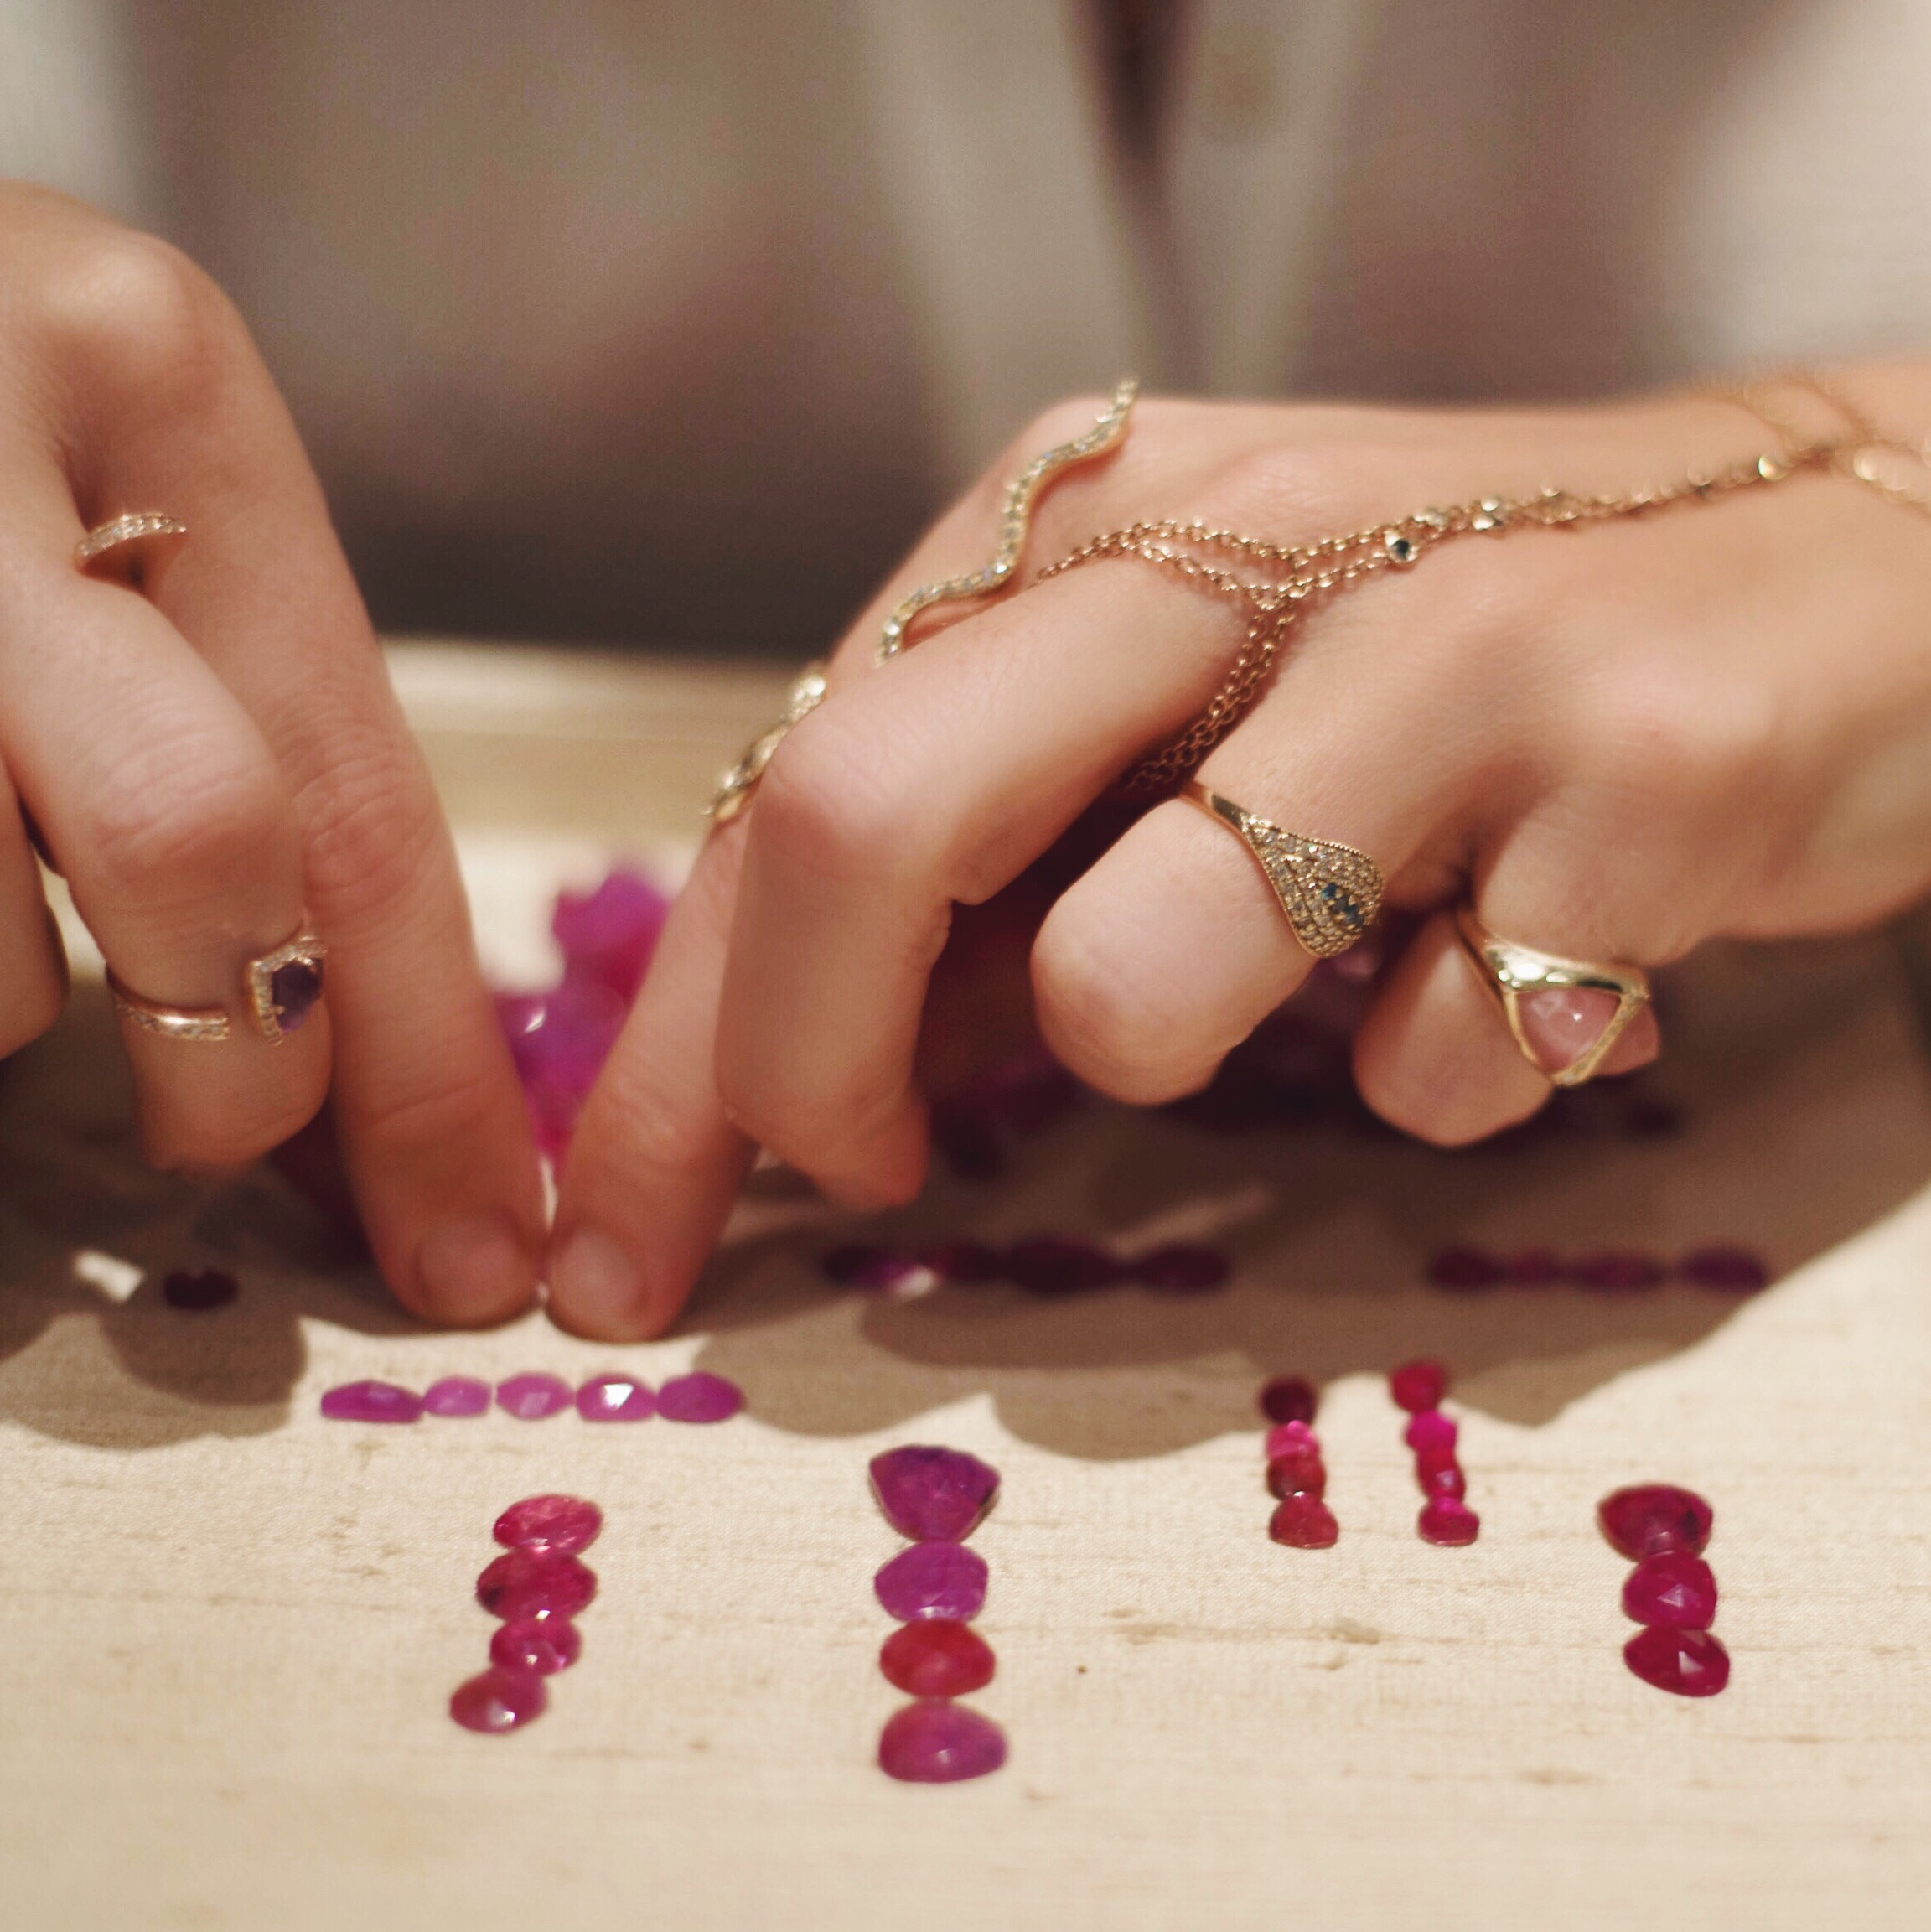  Jacquie's favorite pasttime: sorting through colorful gemstones to get inspired.&nbsp; 